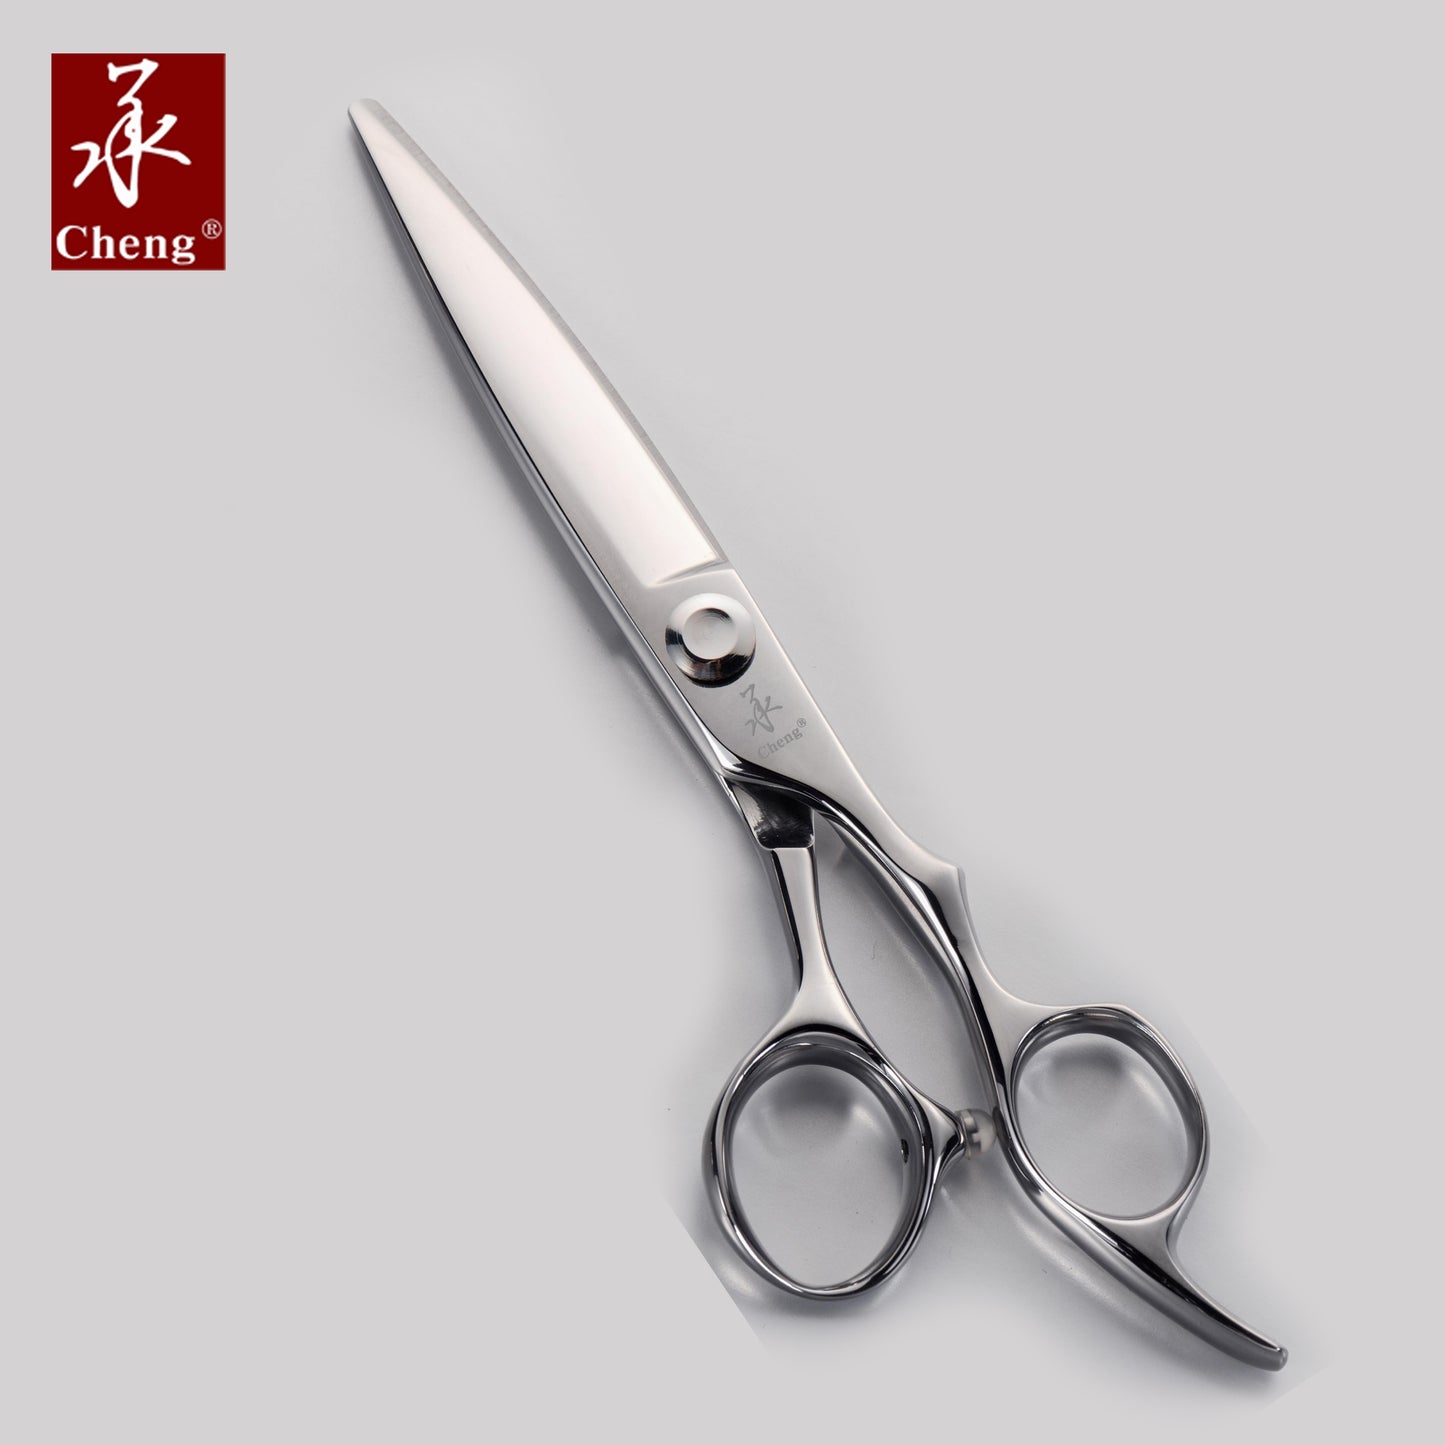 SY-610W 6 INCH Hairdressing Thinning Scissors About=45%